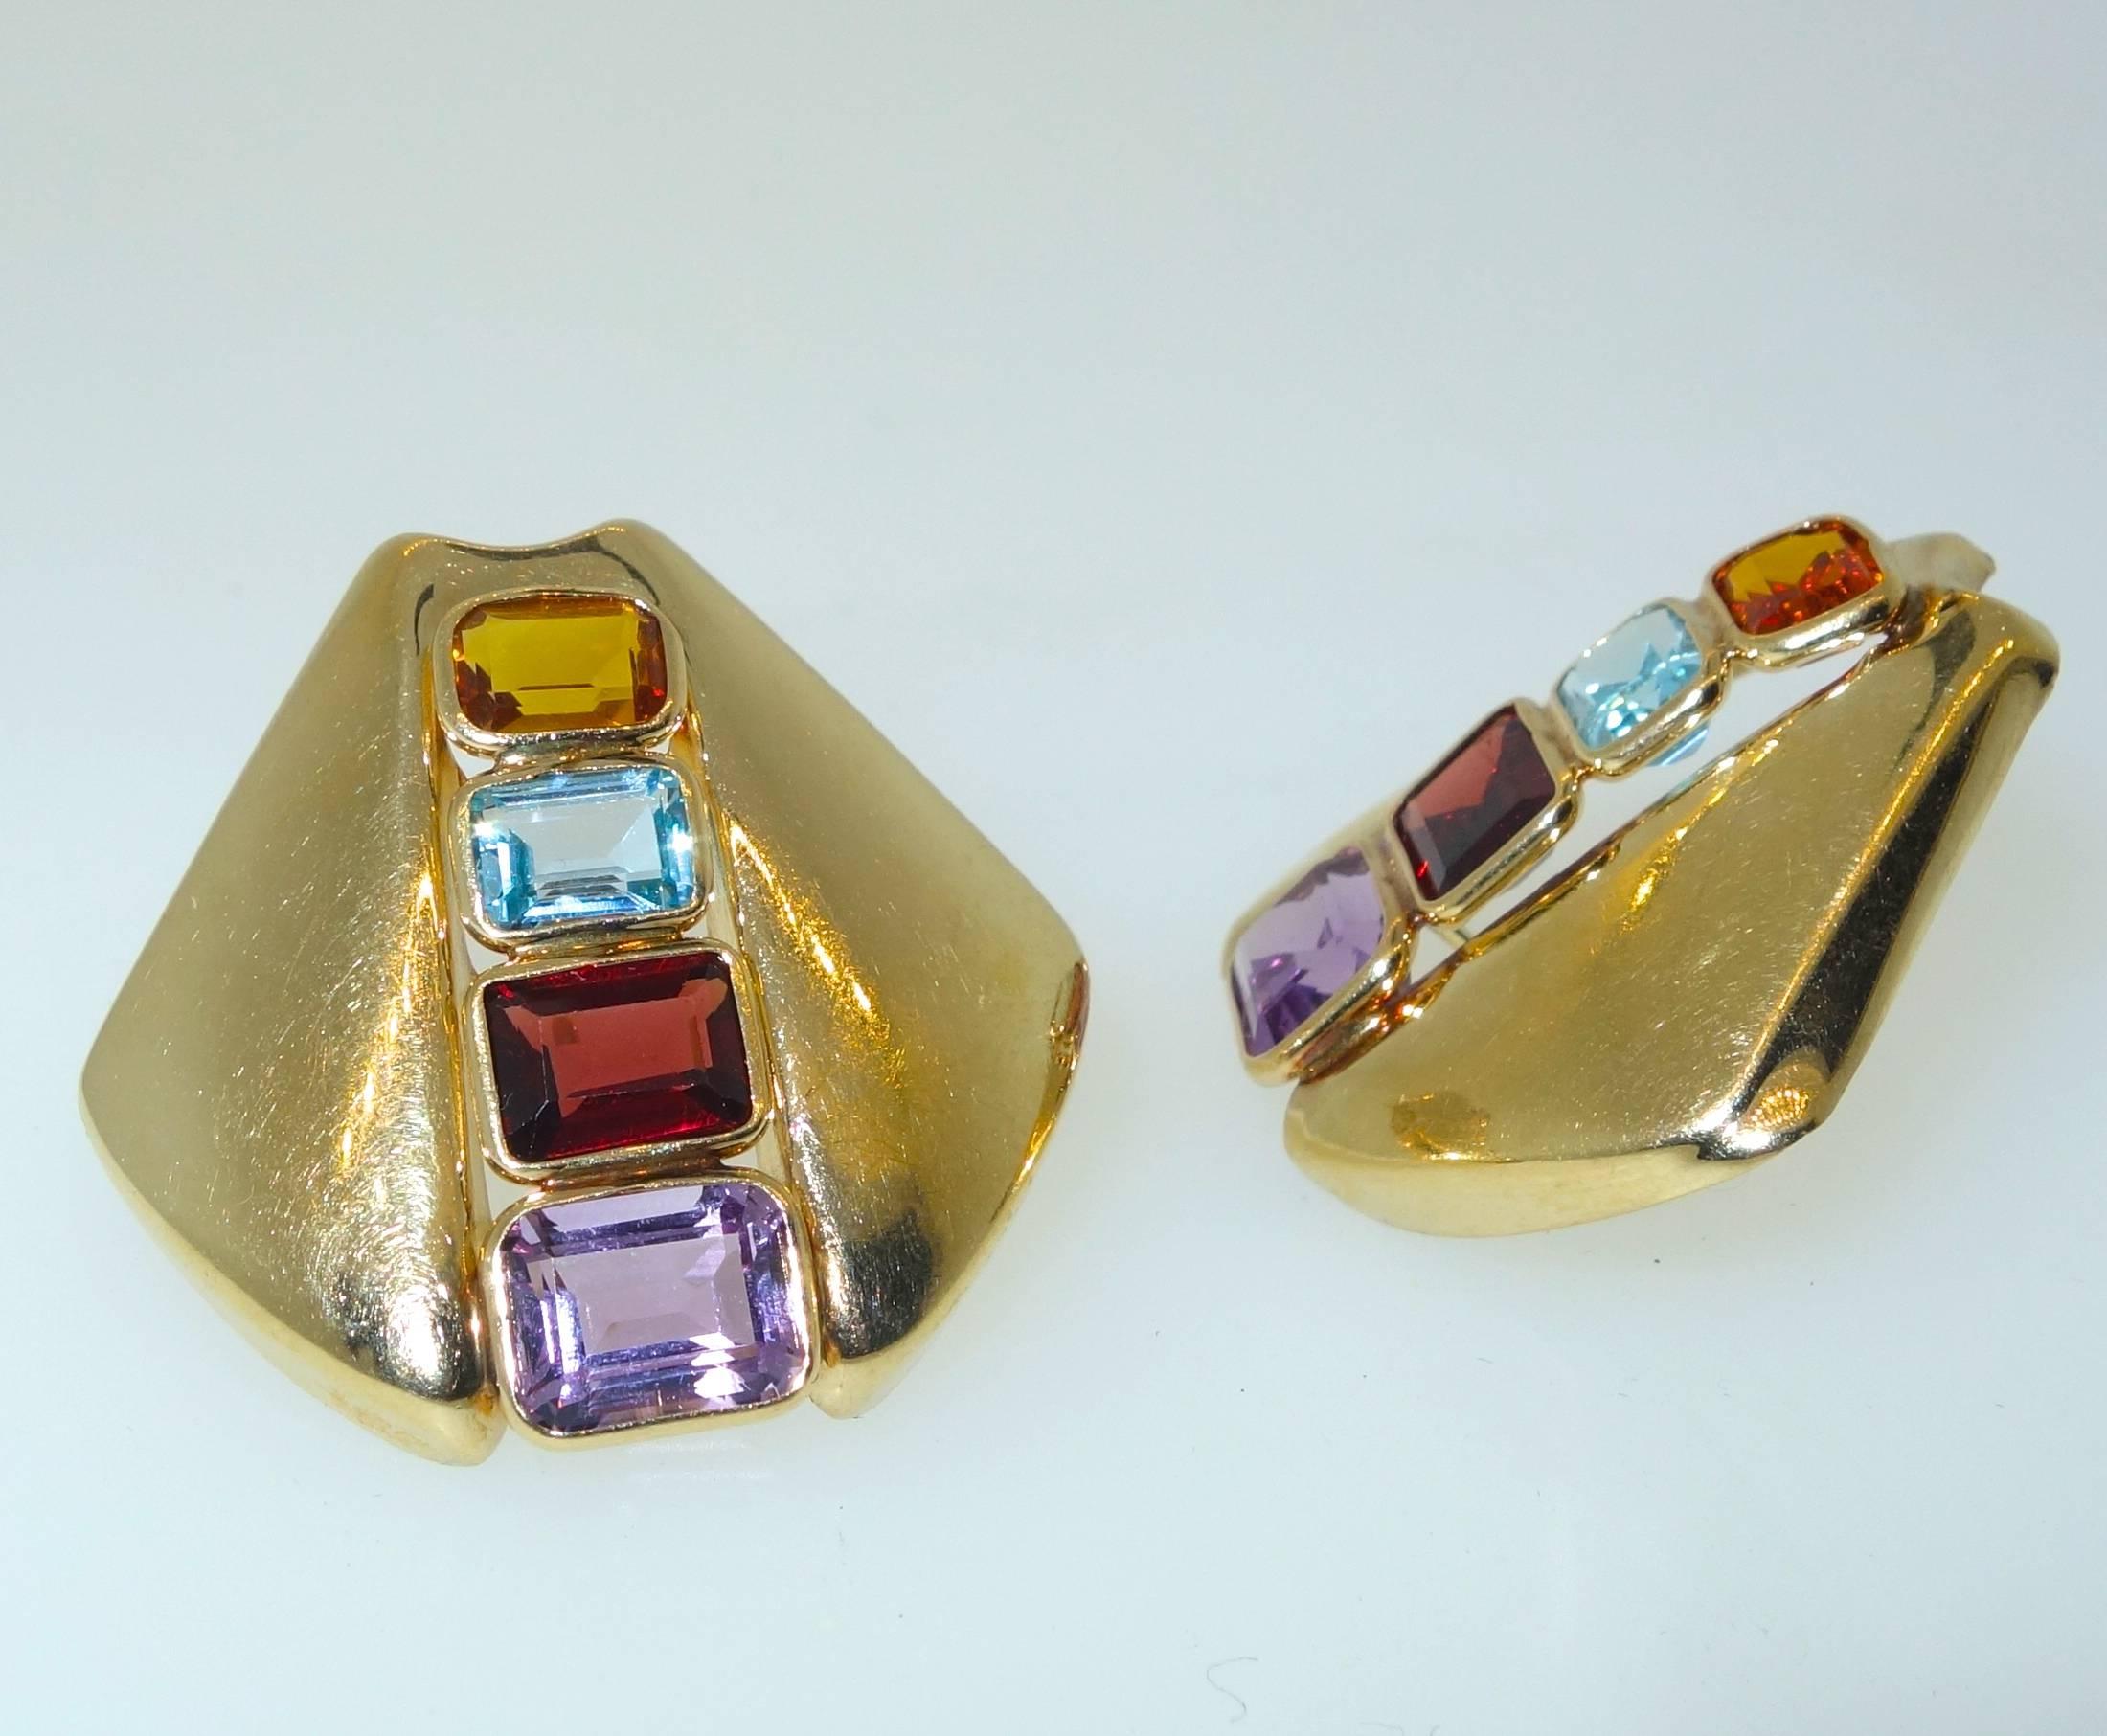 Bright stones - Citrine, garnet, amethyst and blue topaz are bezel set into gold shields  to create a colorful statement for the ear.  These earrings are pierced and can be converted.  They measure 1.25 inches and weigh 6.94 grams.